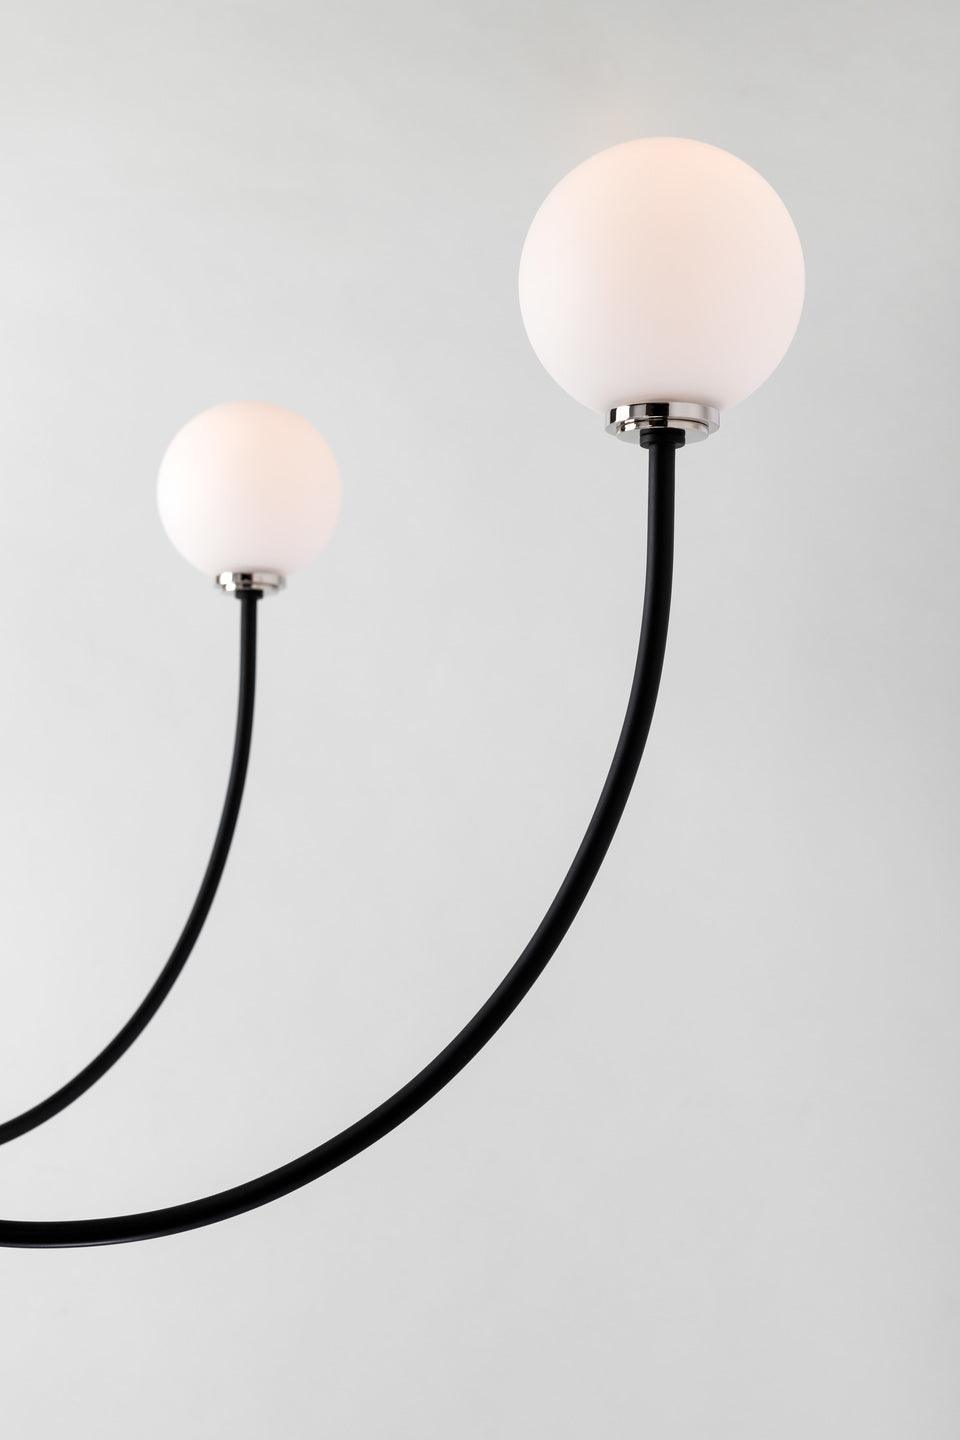 Steel Curve Arm with Frosted Glass Globe Chandelier - LV LIGHTING